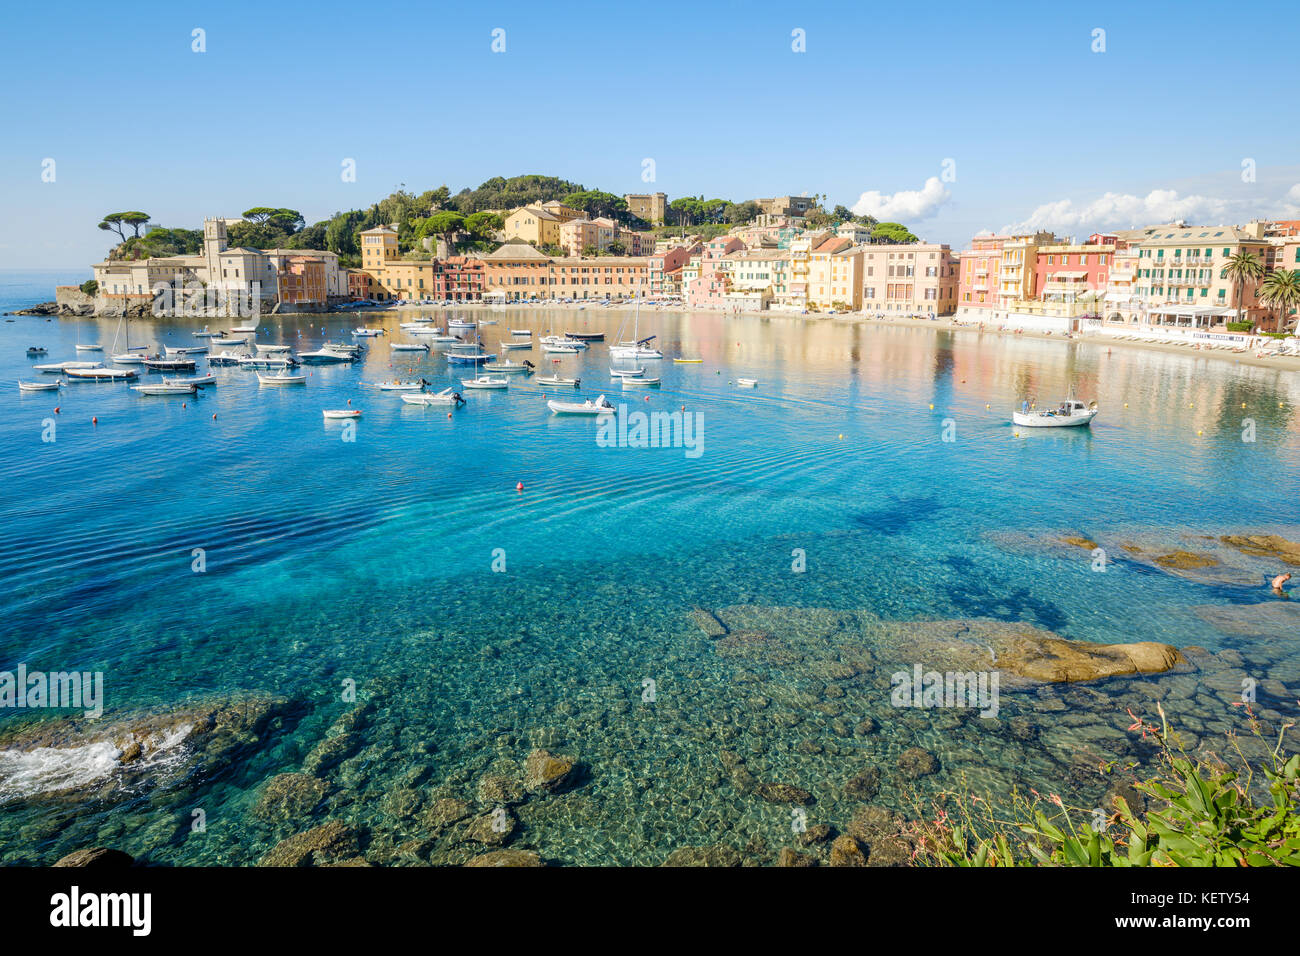 The Bay of Silence and view over the old town of Sestri Levante on the Italian Riviera, Liguria, Italy Stock Photo